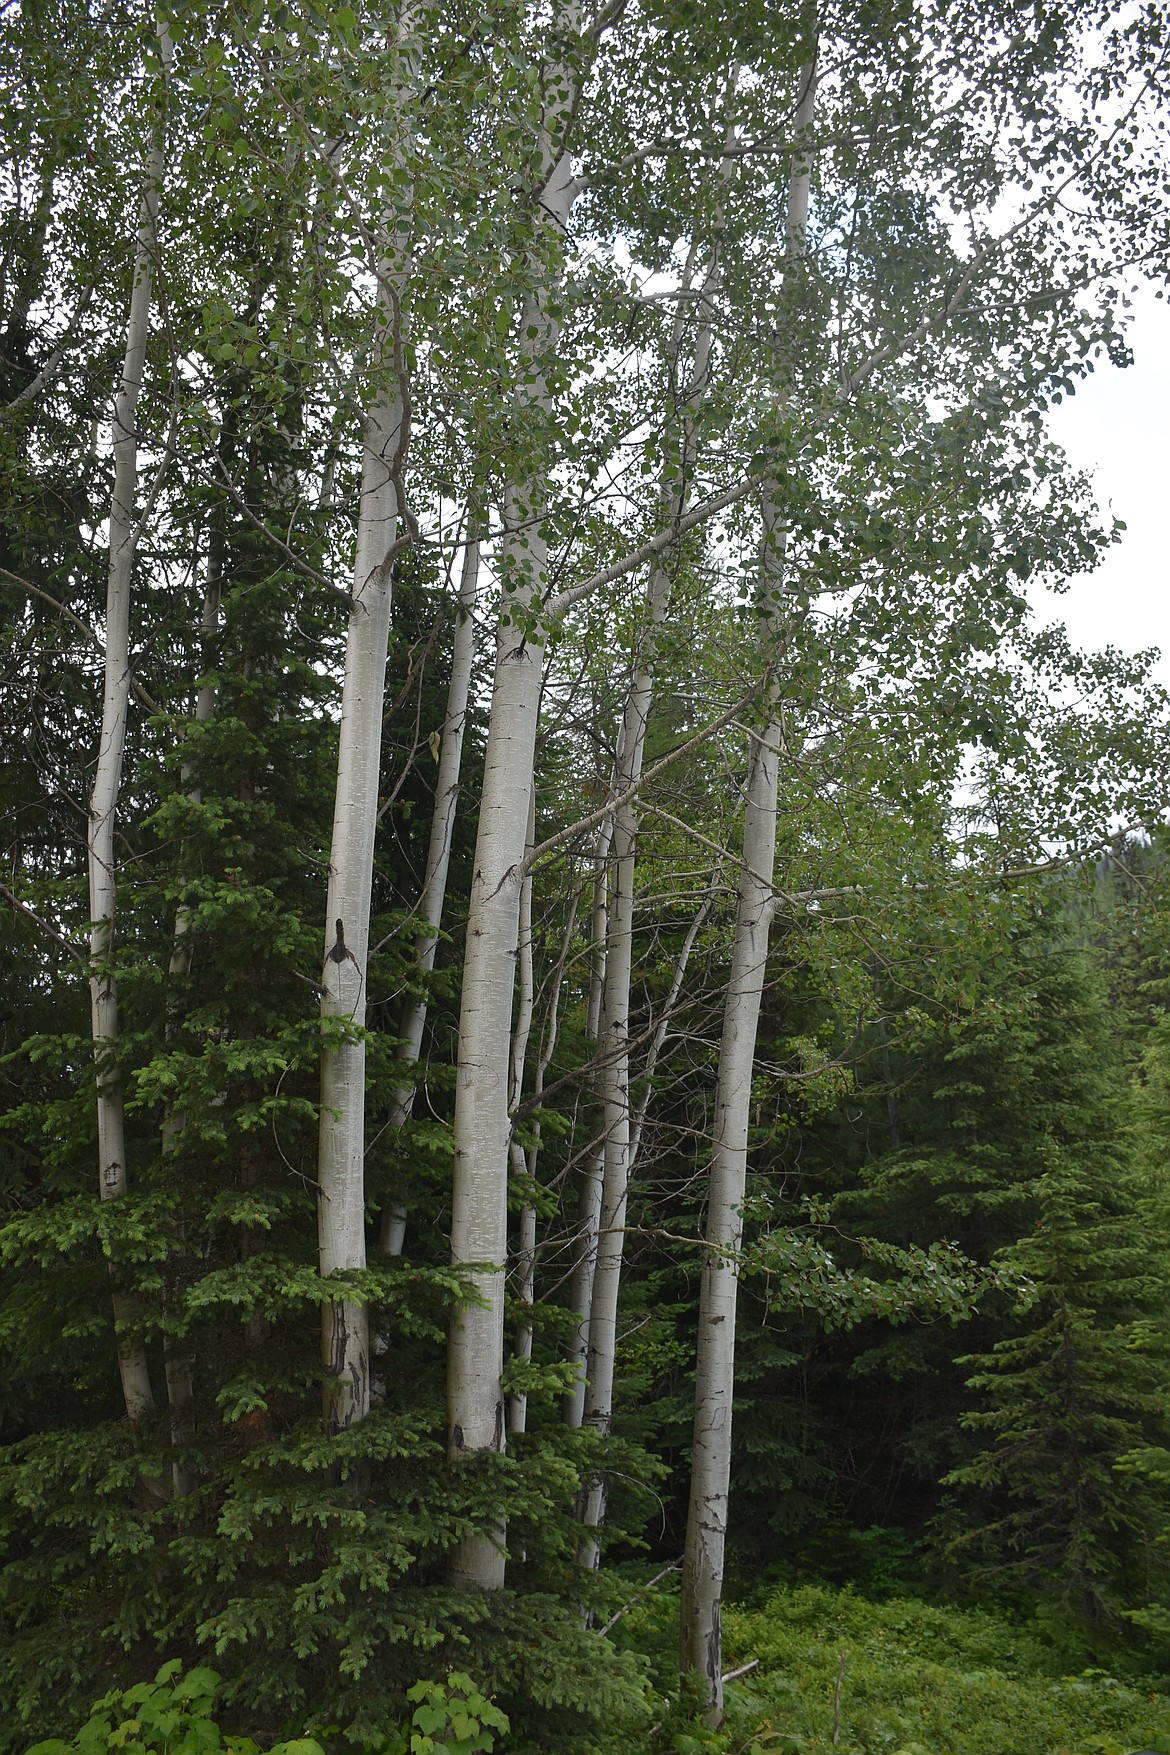 Photo by DON BARTLING
The aspen is short lived and often replaced by conifers. The aspen wood is used for matches, boxes and particle board.